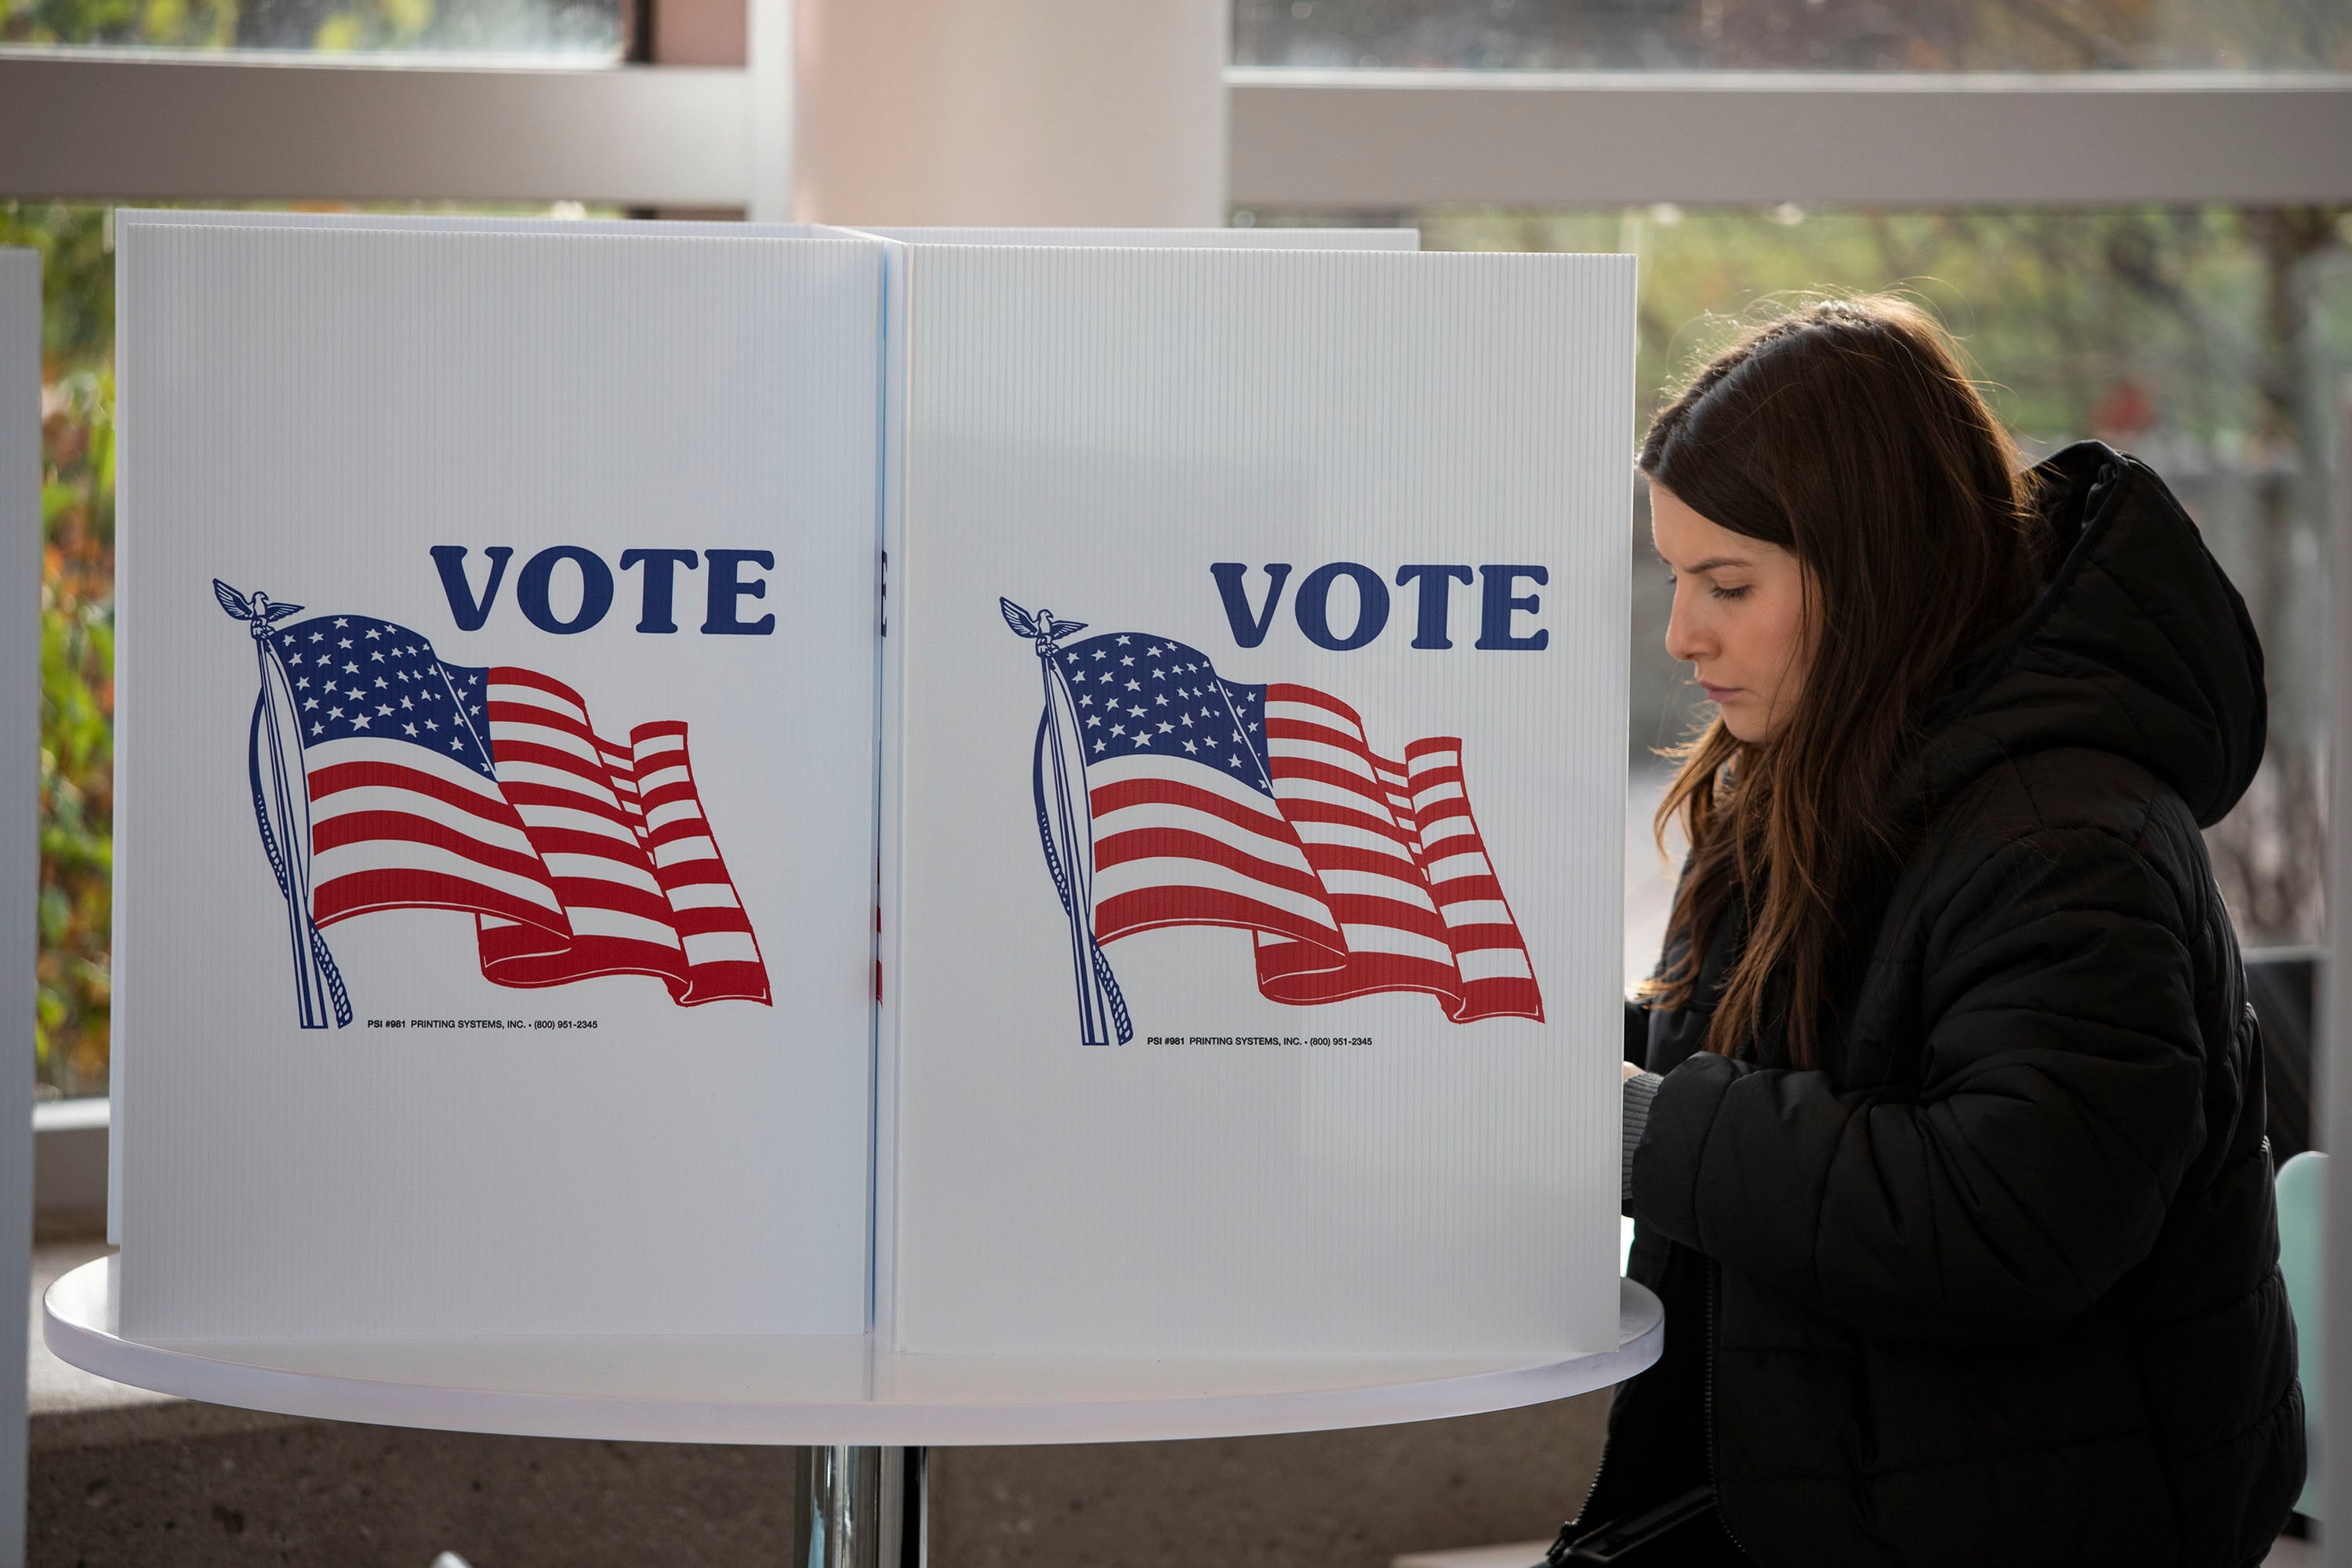 A young woman stands at a voting booth adorned with a large American flag and the word “Vote”